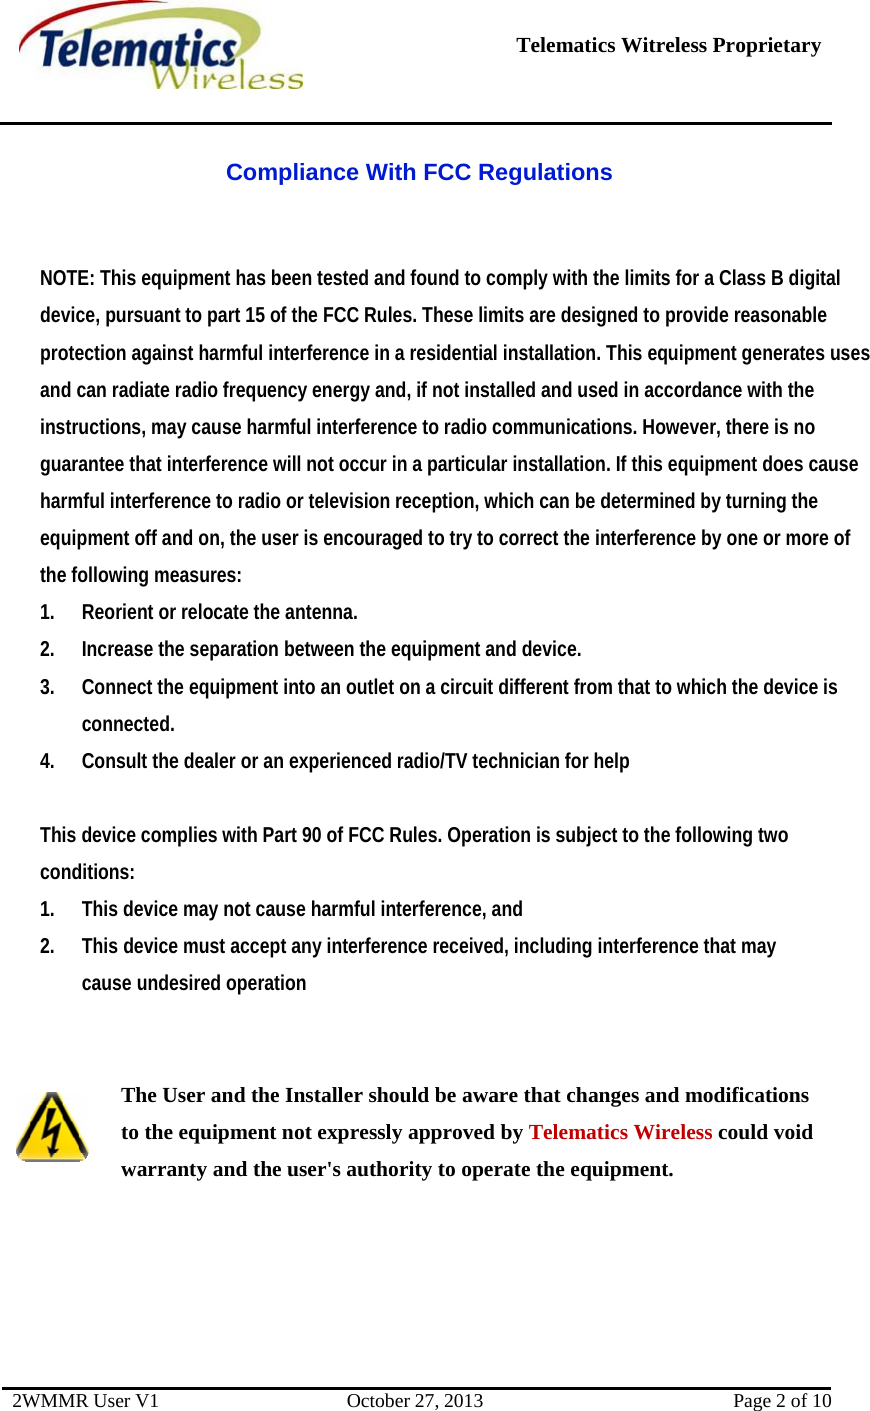   Telematics Witreless Proprietary 2WMMR User V1  October 27, 2013  Page 2 of 10 Compliance With FCC Regulations  NOTE: This equipment has been tested and found to comply with the limits for a Class B digital device, pursuant to part 15 of the FCC Rules. These limits are designed to provide reasonable protection against harmful interference in a residential installation. This equipment generates uses and can radiate radio frequency energy and, if not installed and used in accordance with the instructions, may cause harmful interference to radio communications. However, there is no guarantee that interference will not occur in a particular installation. If this equipment does cause harmful interference to radio or television reception, which can be determined by turning the equipment off and on, the user is encouraged to try to correct the interference by one or more of the following measures: 1. Reorient or relocate the antenna. 2. Increase the separation between the equipment and device. 3. Connect the equipment into an outlet on a circuit different from that to which the device is connected. 4. Consult the dealer or an experienced radio/TV technician for help  This device complies with Part 90 of FCC Rules. Operation is subject to the following two conditions: 1. This device may not cause harmful interference, and 2. This device must accept any interference received, including interference that may cause undesired operation   The User and the Installer should be aware that changes and modifications to the equipment not expressly approved by Telematics Wireless could void warranty and the user&apos;s authority to operate the equipment.     